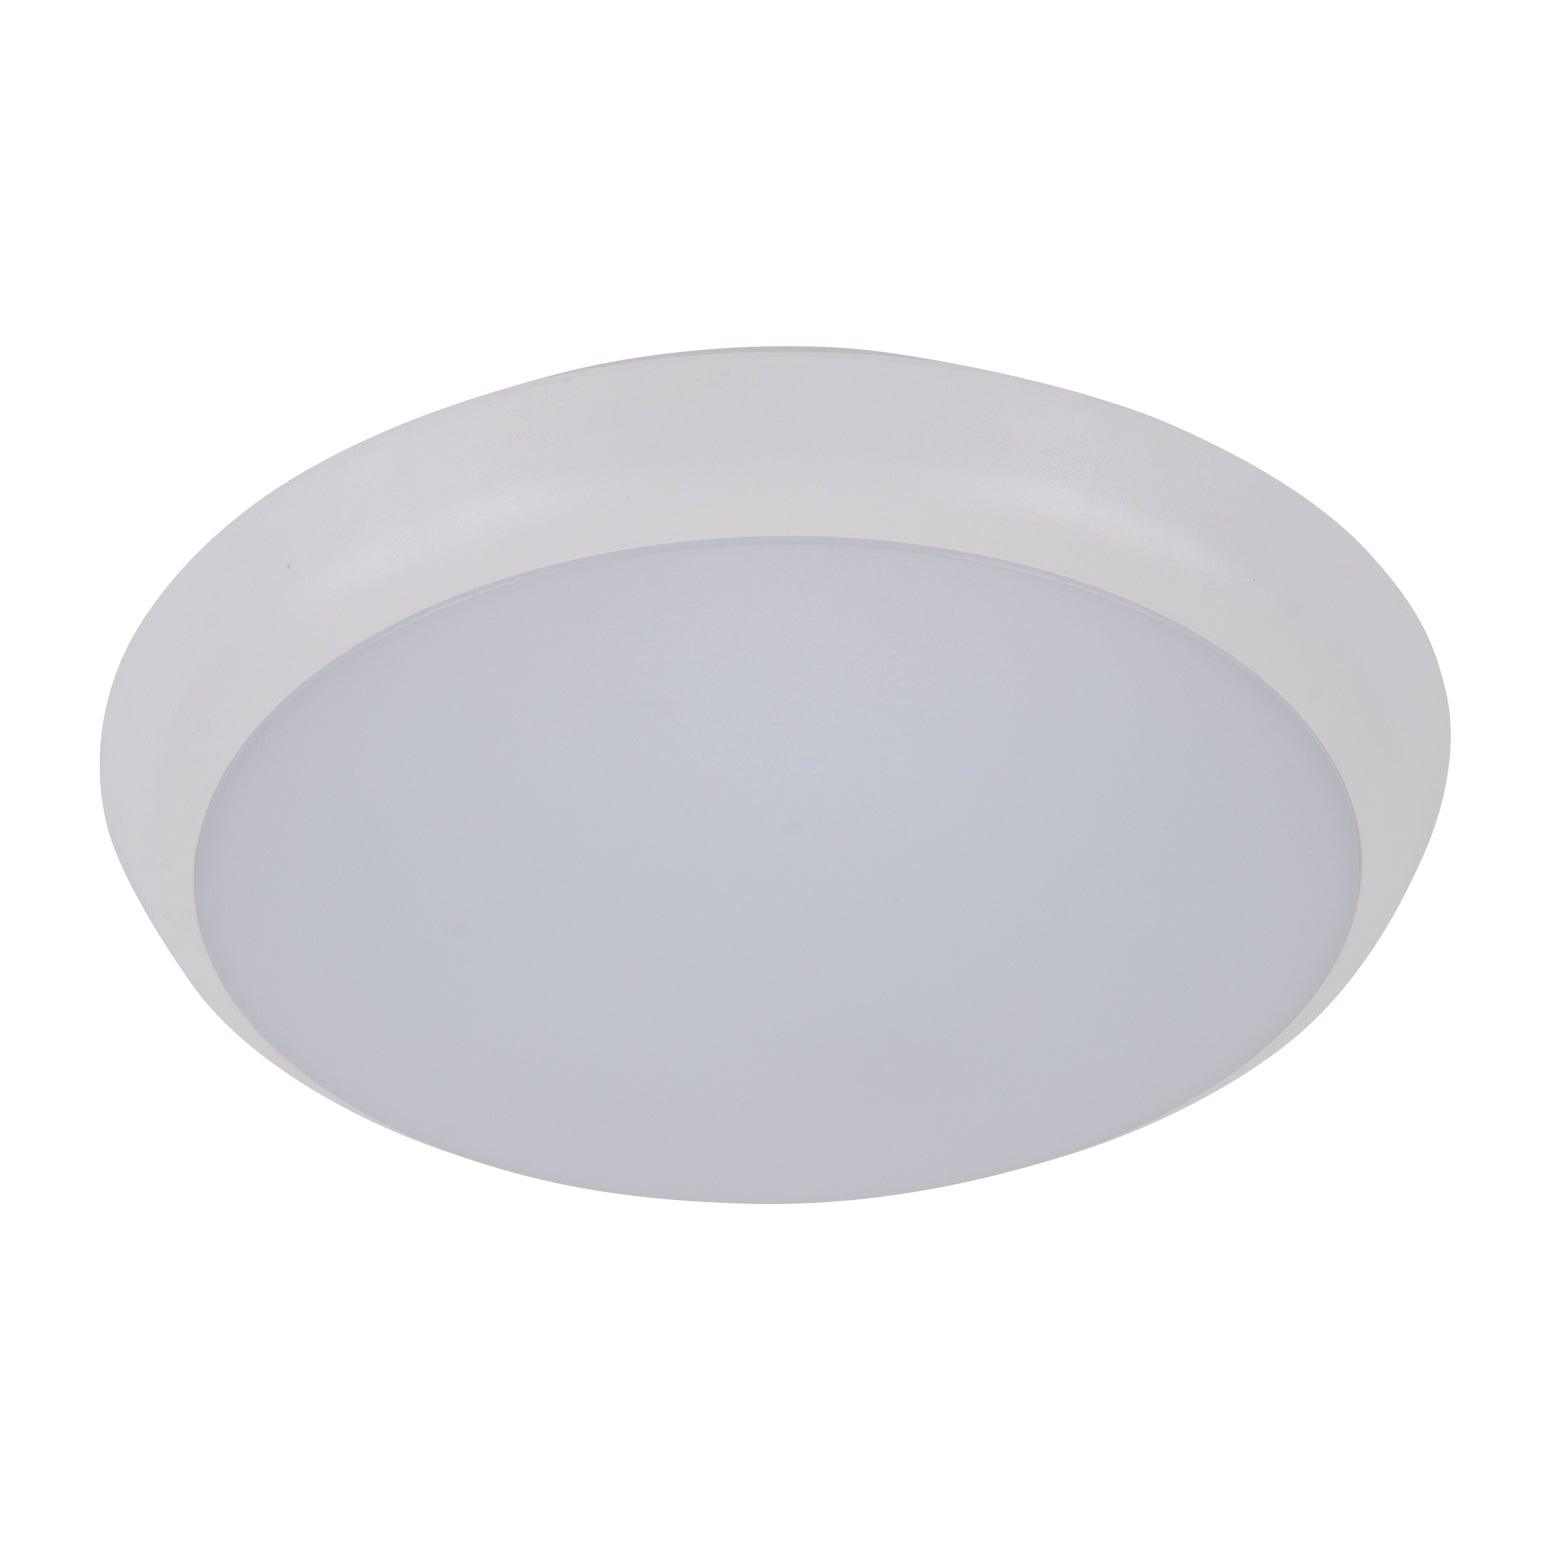 Domus Lighting Oyster Lights 200mm / Round / WHITE Solar-Trio - 200/300/400 Colour Switchable Led Ceiling Light Ip54 240V - Trio Lights-For-You 20938